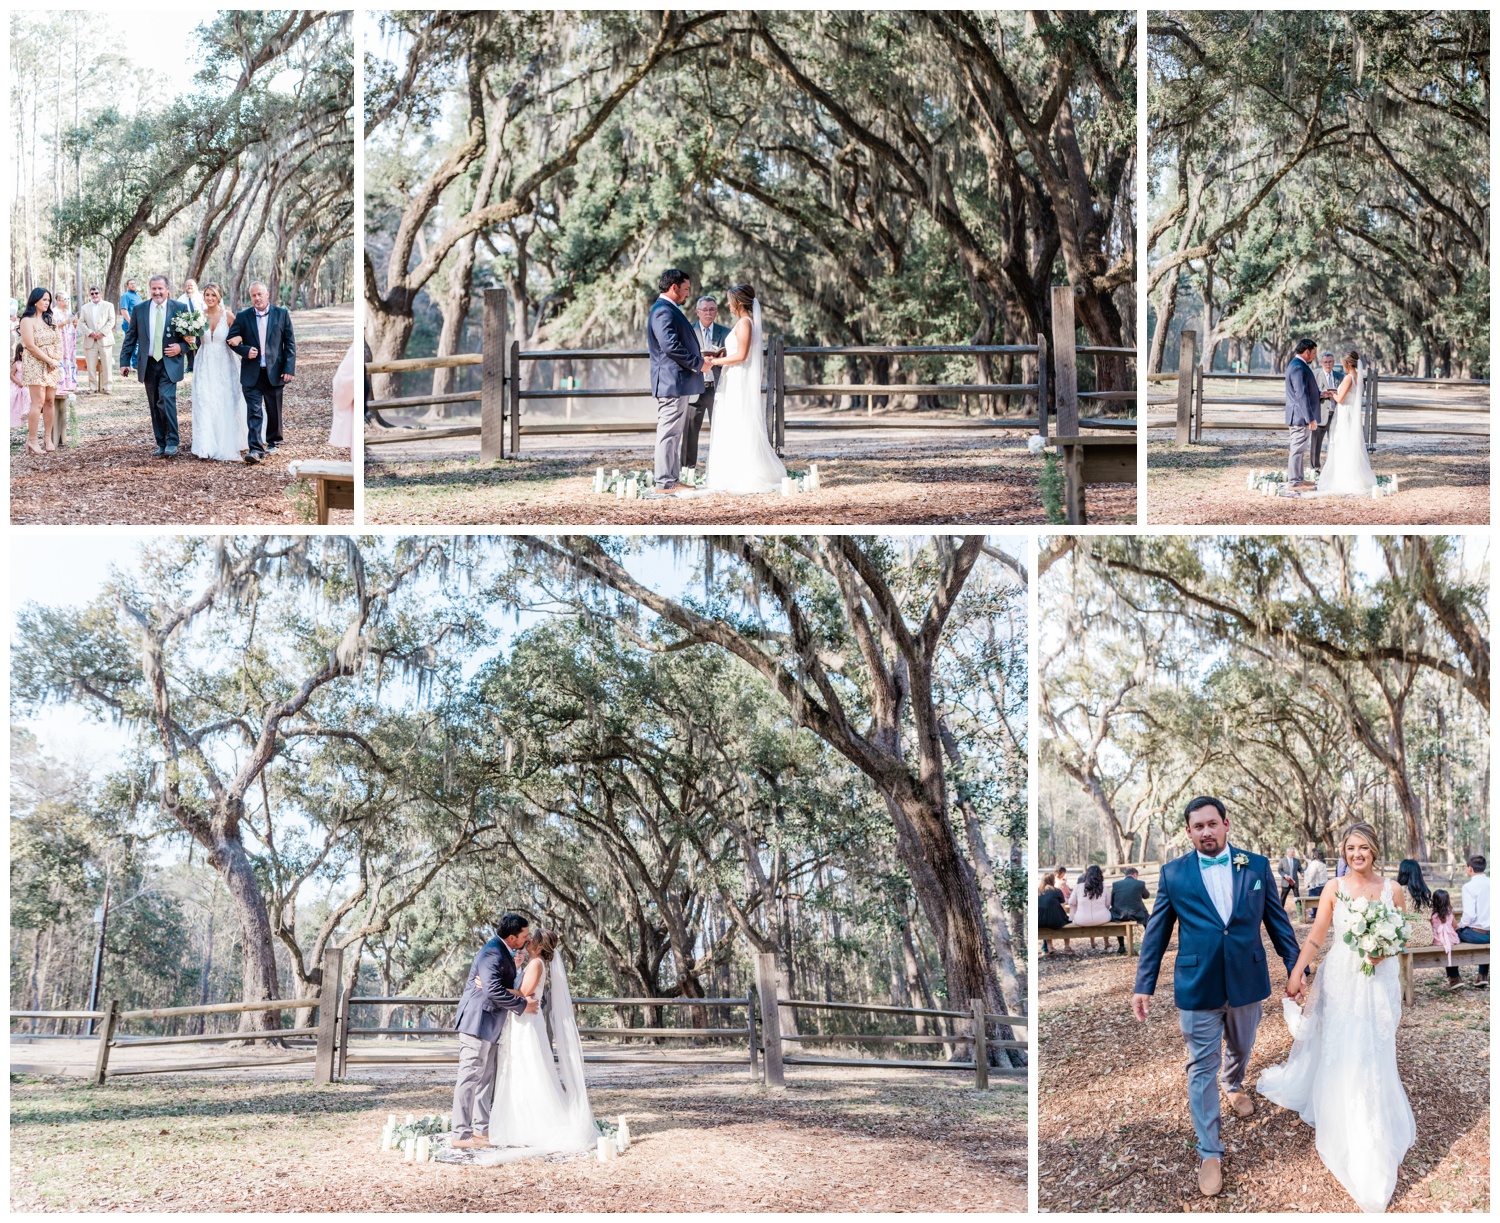 Elope at Wormsloe - Hunter and Houston - the savannah elopement package